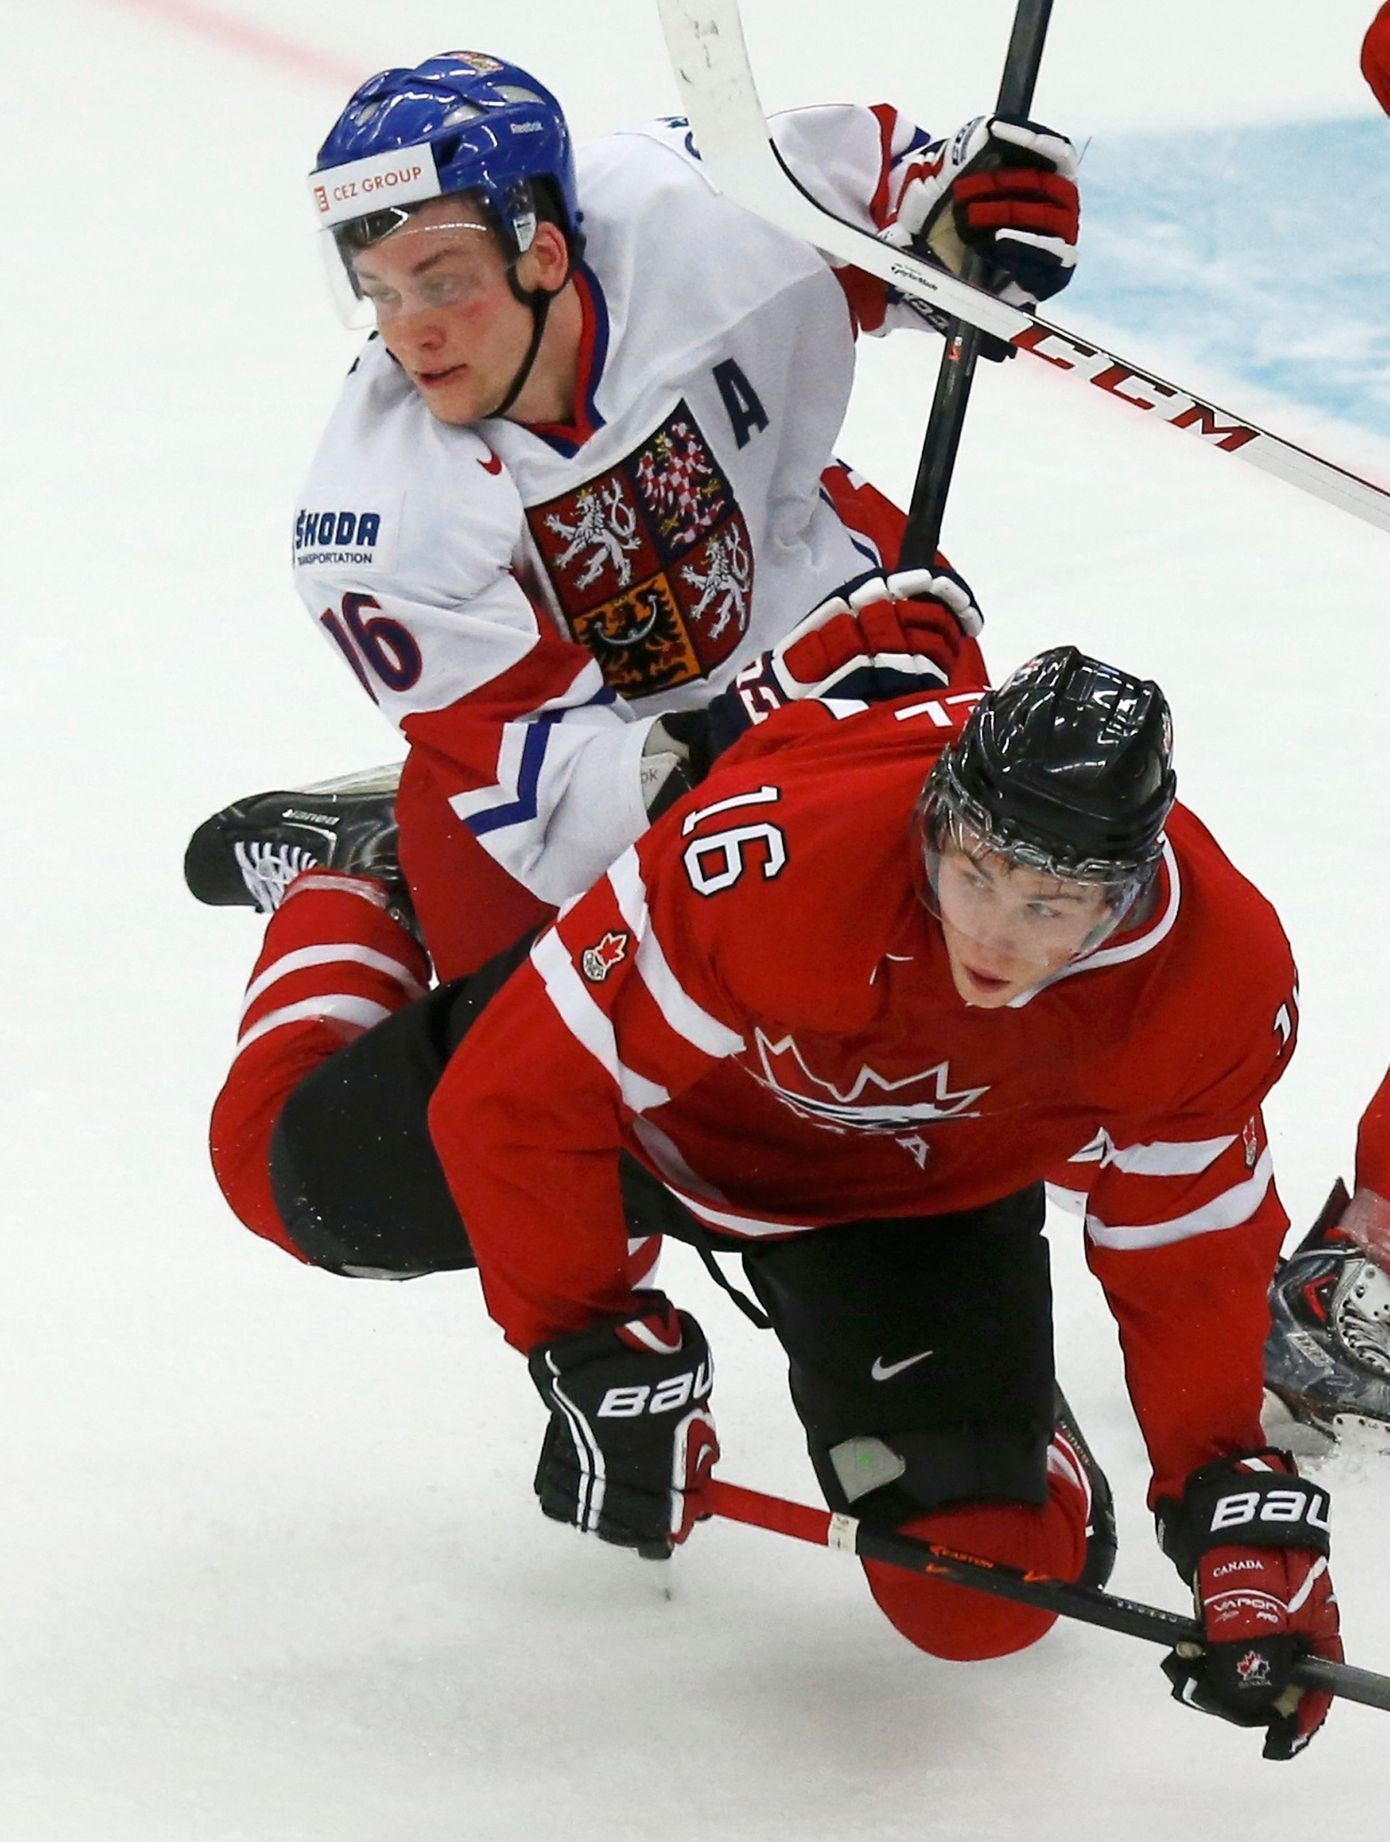 Czech Republic's Faksa checks Canada's Rychel during the second period of their IIHF World Junior Championship ice hockey game in Malmo